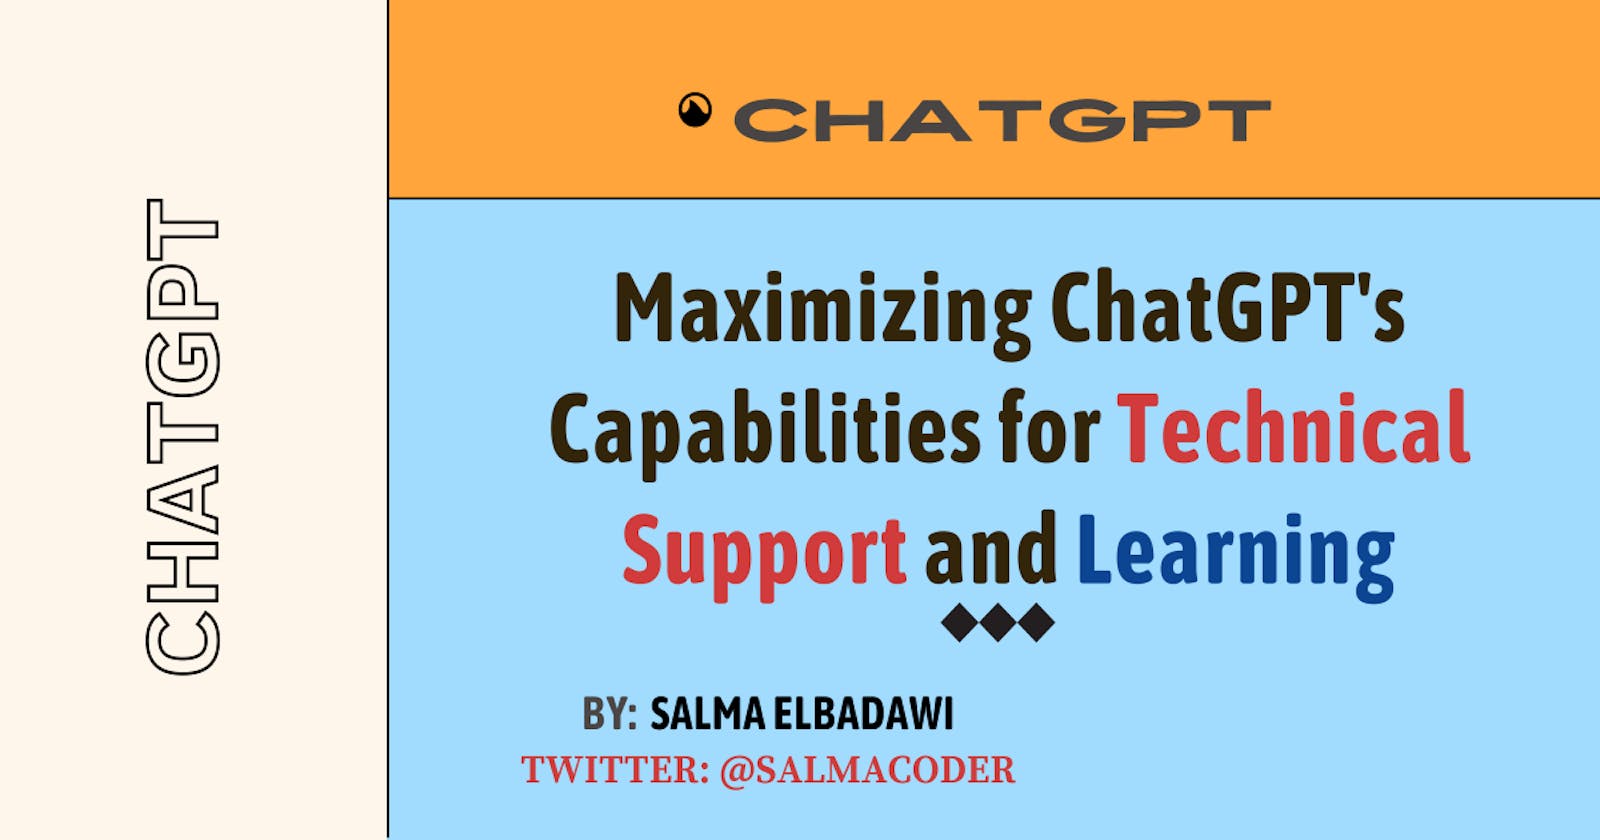 Maximizing ChatGPT's Capabilities for Technical Support and Learning